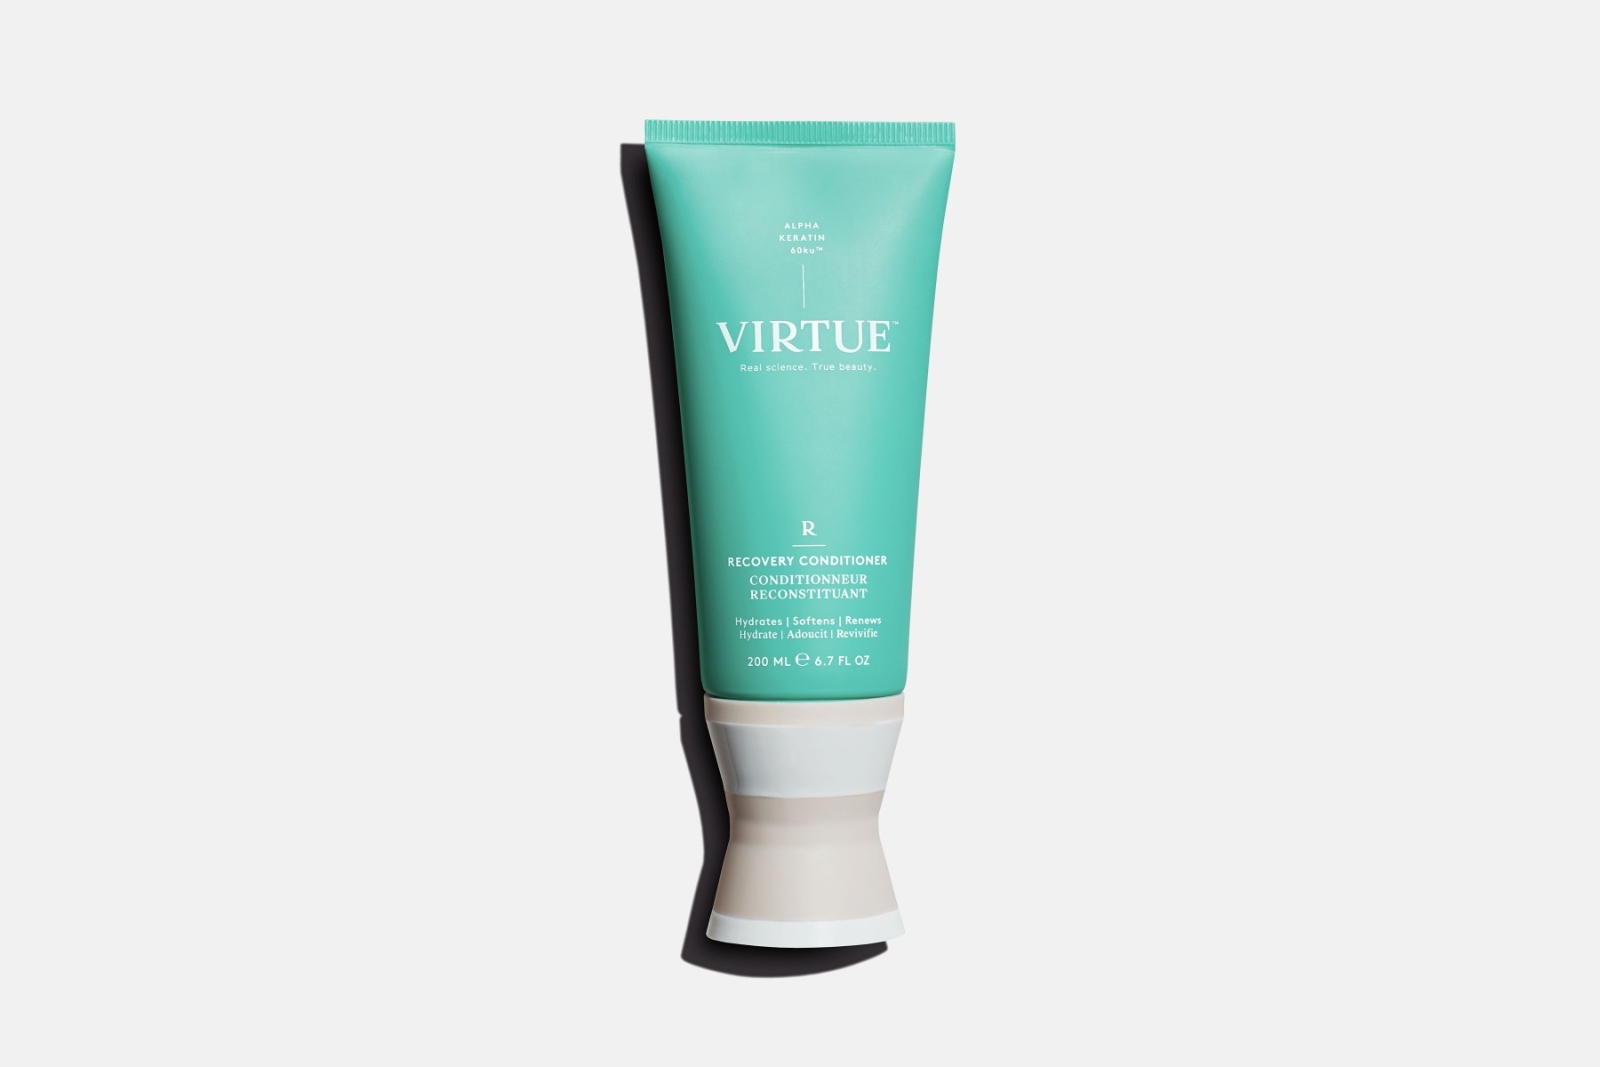 VIRTUE Recovery Conditioner